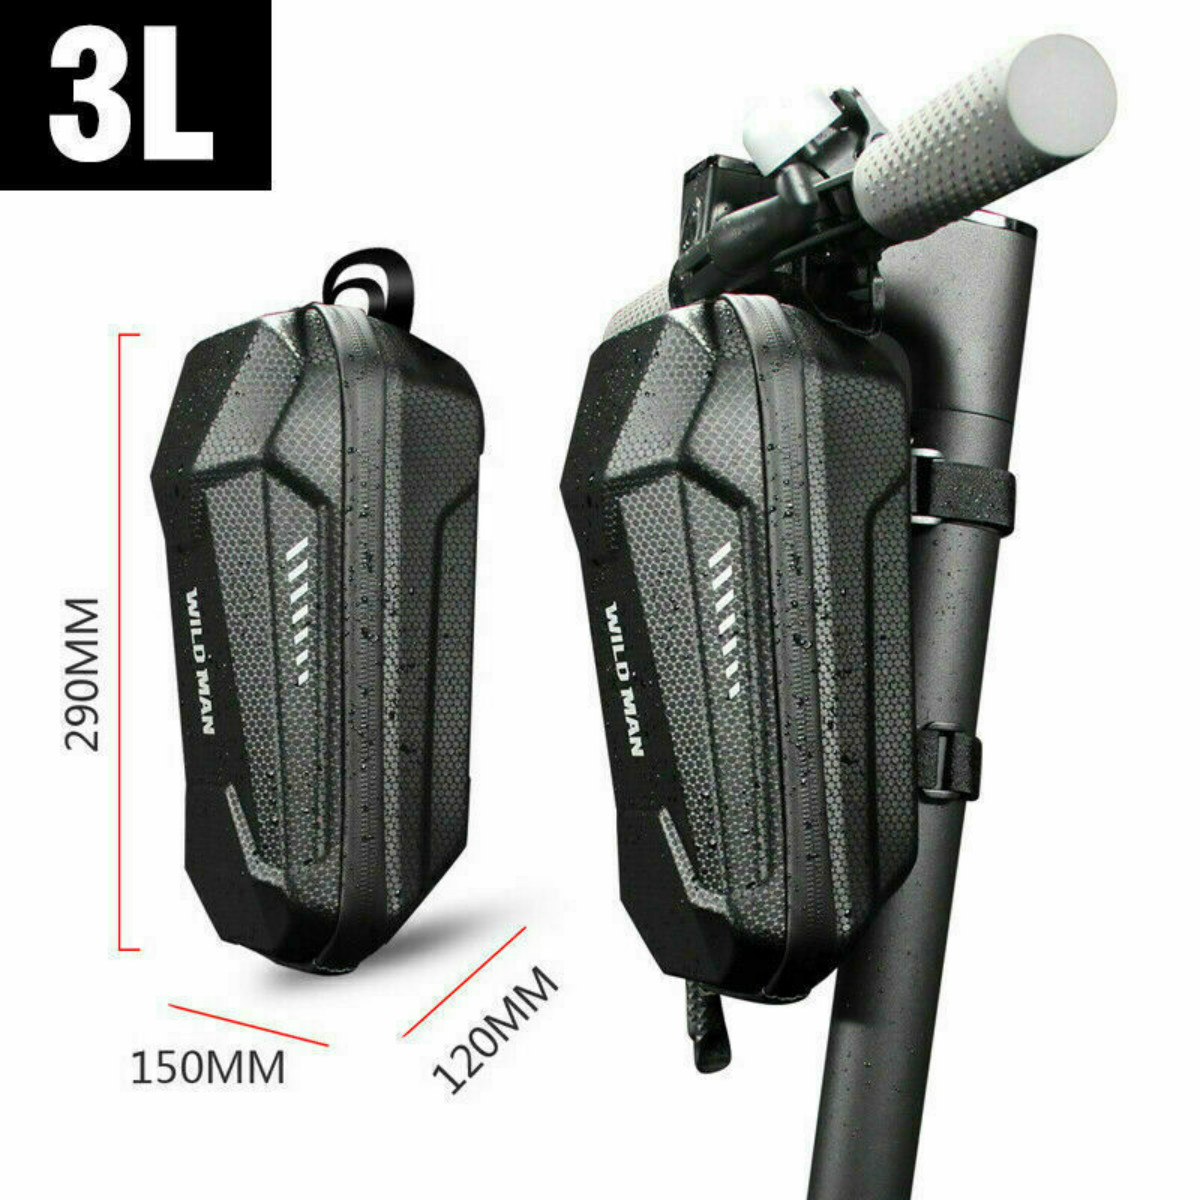 show original title Details about   Wild Man EVA Hard Shell Electric Scooter Storage Bag For XIAOMI mijia M365 NEW